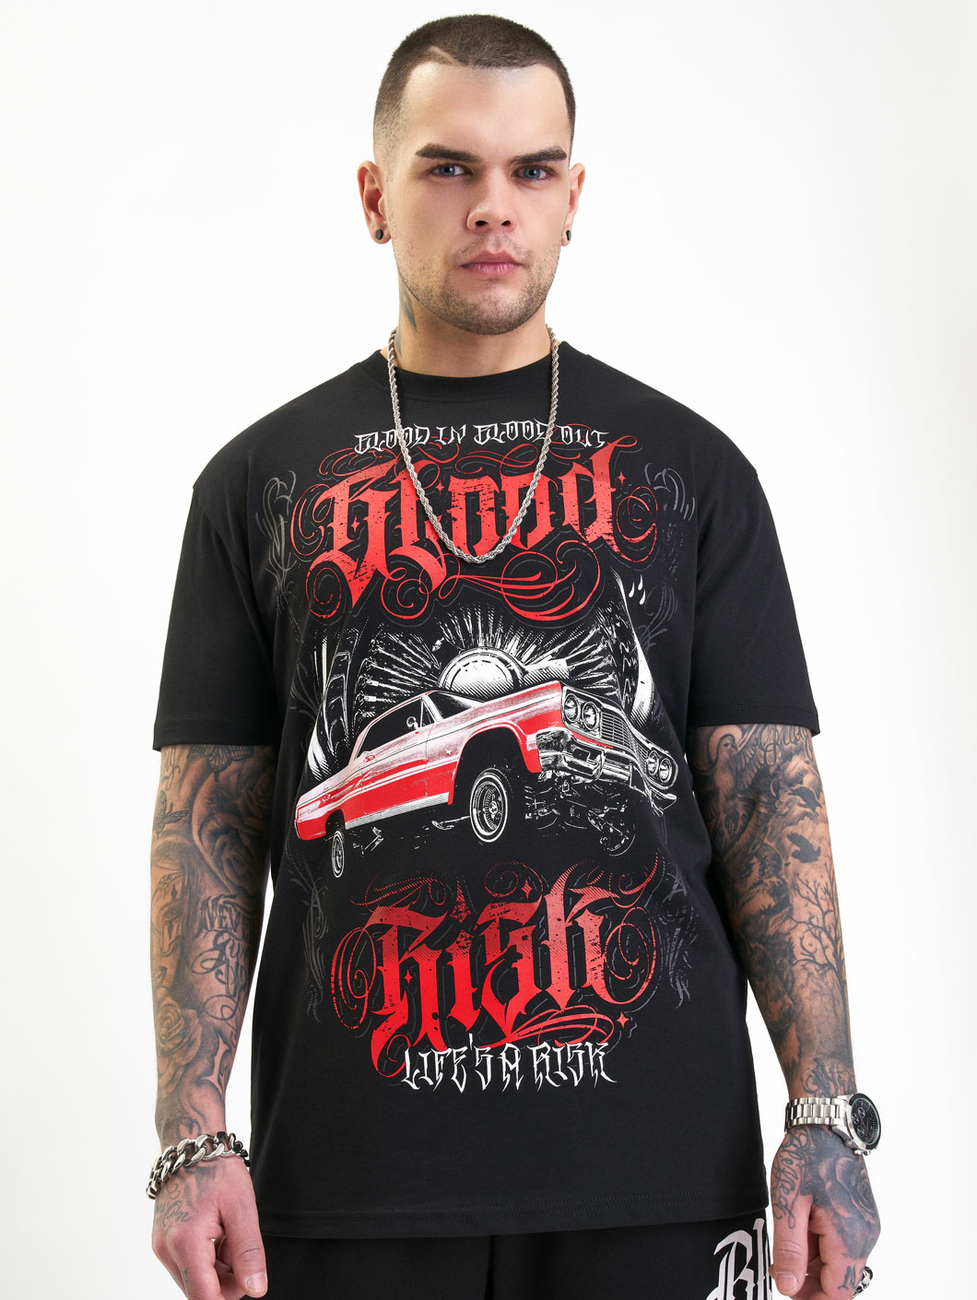 Blood In Blood Out Tavos T-Shirt 4XL